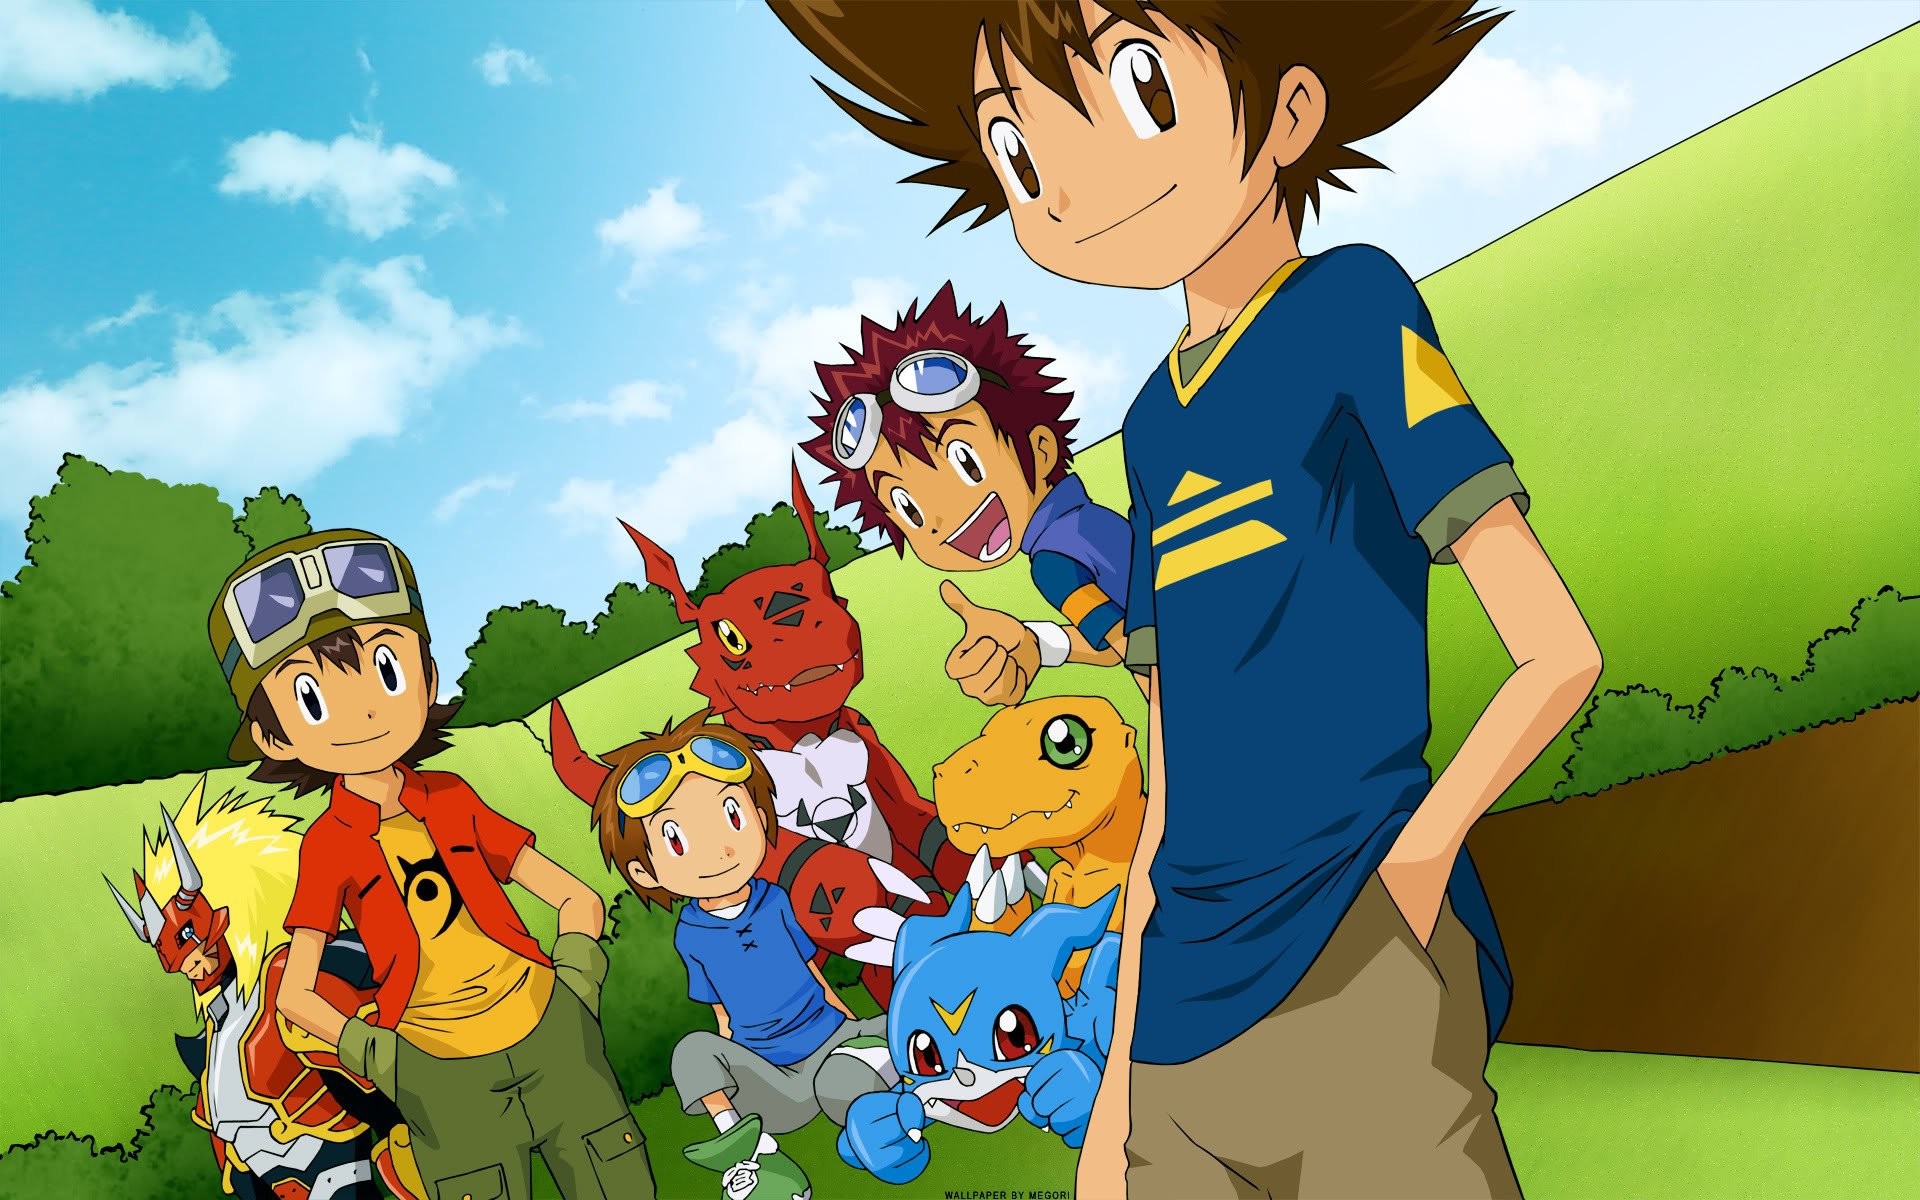 1920x1200 Digimon Adventure Wallpapers Backgrounds Wallpaper | HD Wallpapers |  Pinterest | Digimon, Wallpaper and Wallpaper backgrounds